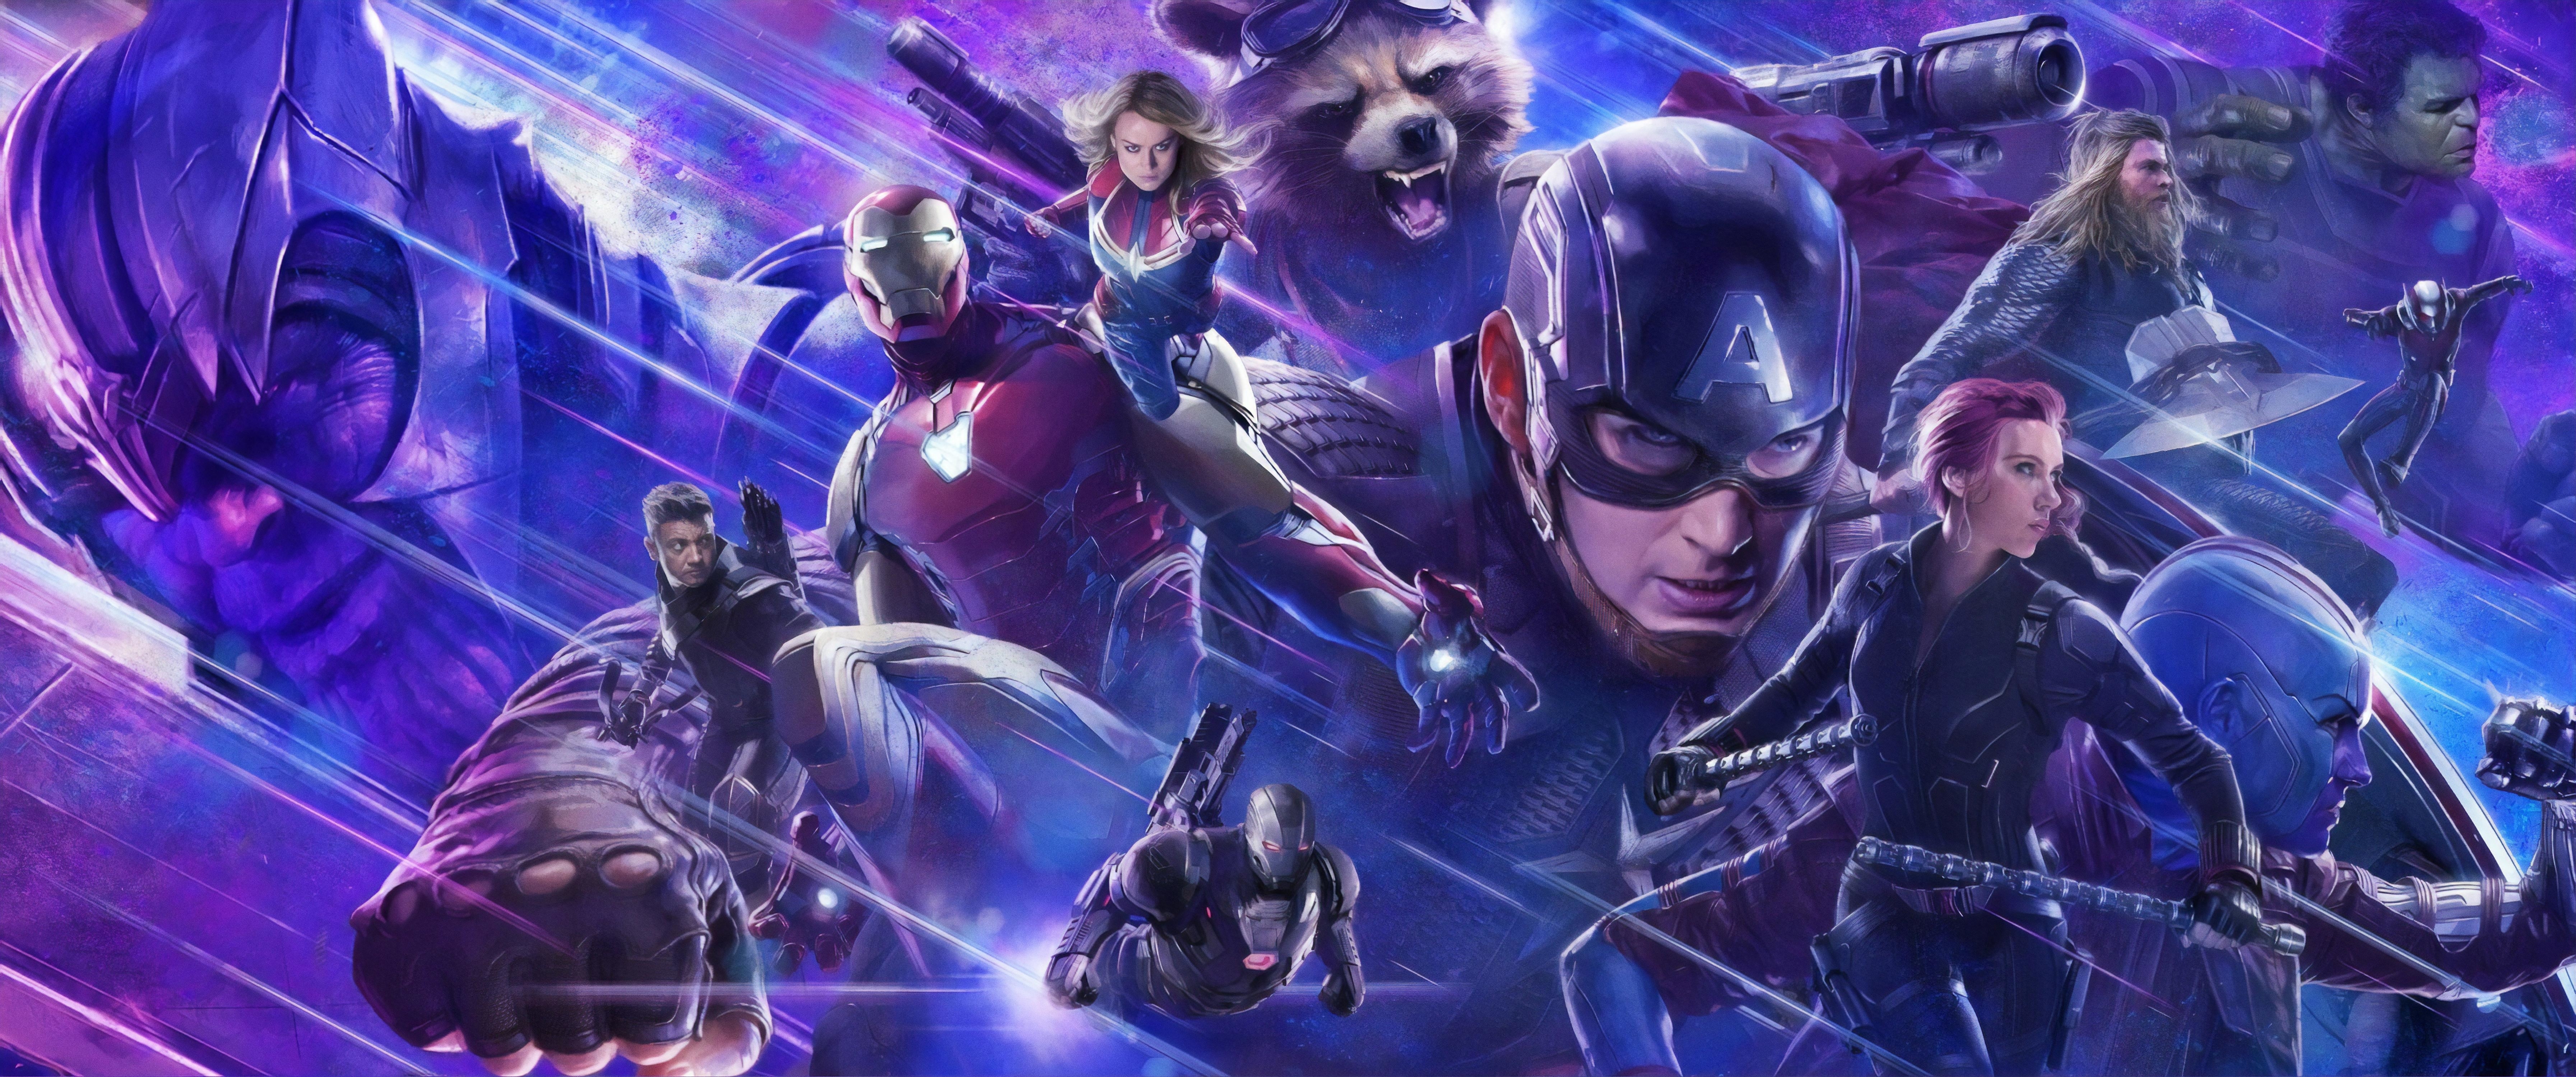 48x1152 Avengers Endgame Banner 48x1152 Resolution Wallpaper Hd Movies 4k Wallpapers Images Photos And Background Wallpapers Den